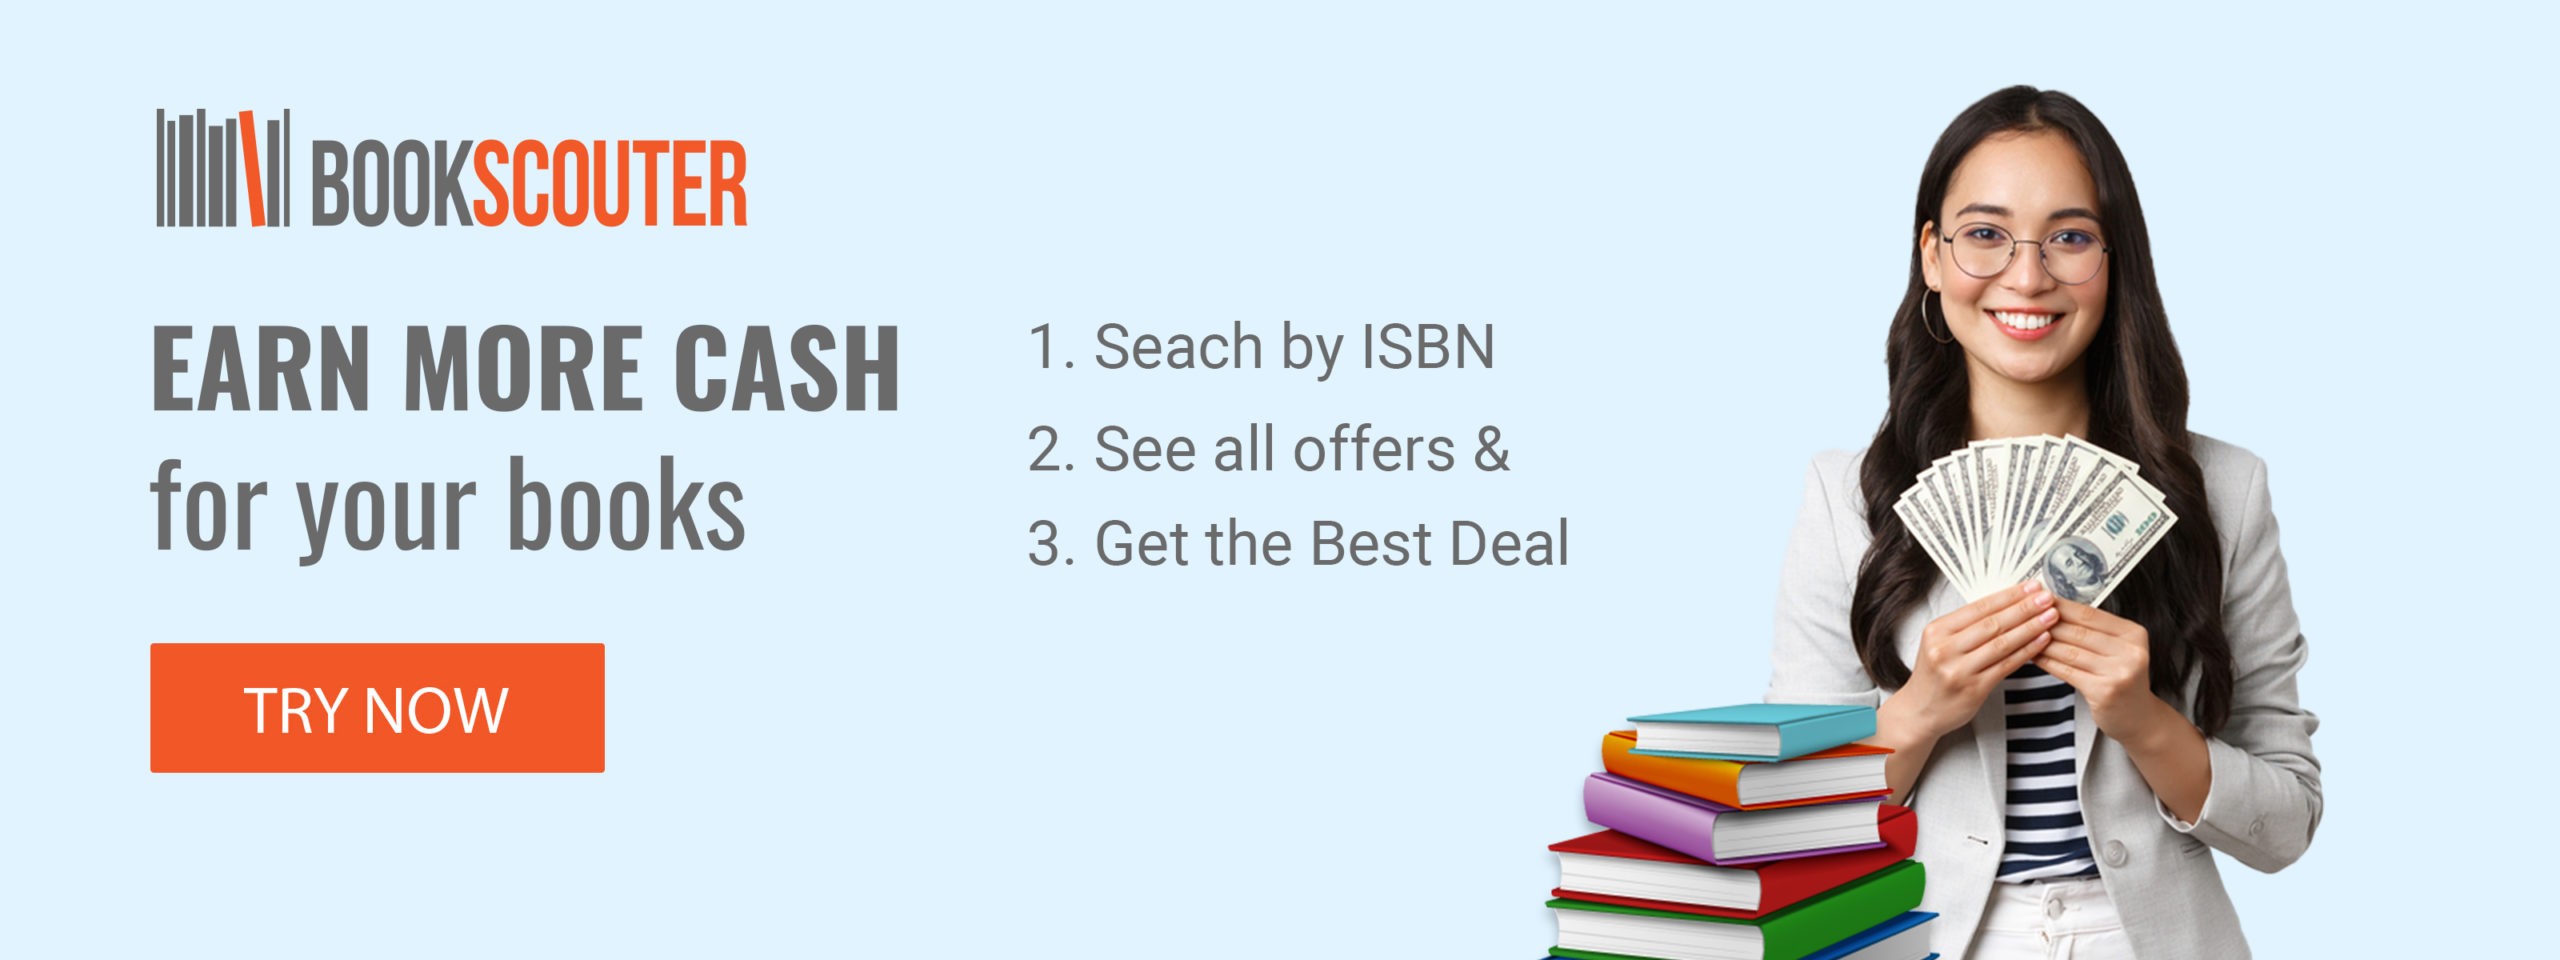 earn more cash for your books